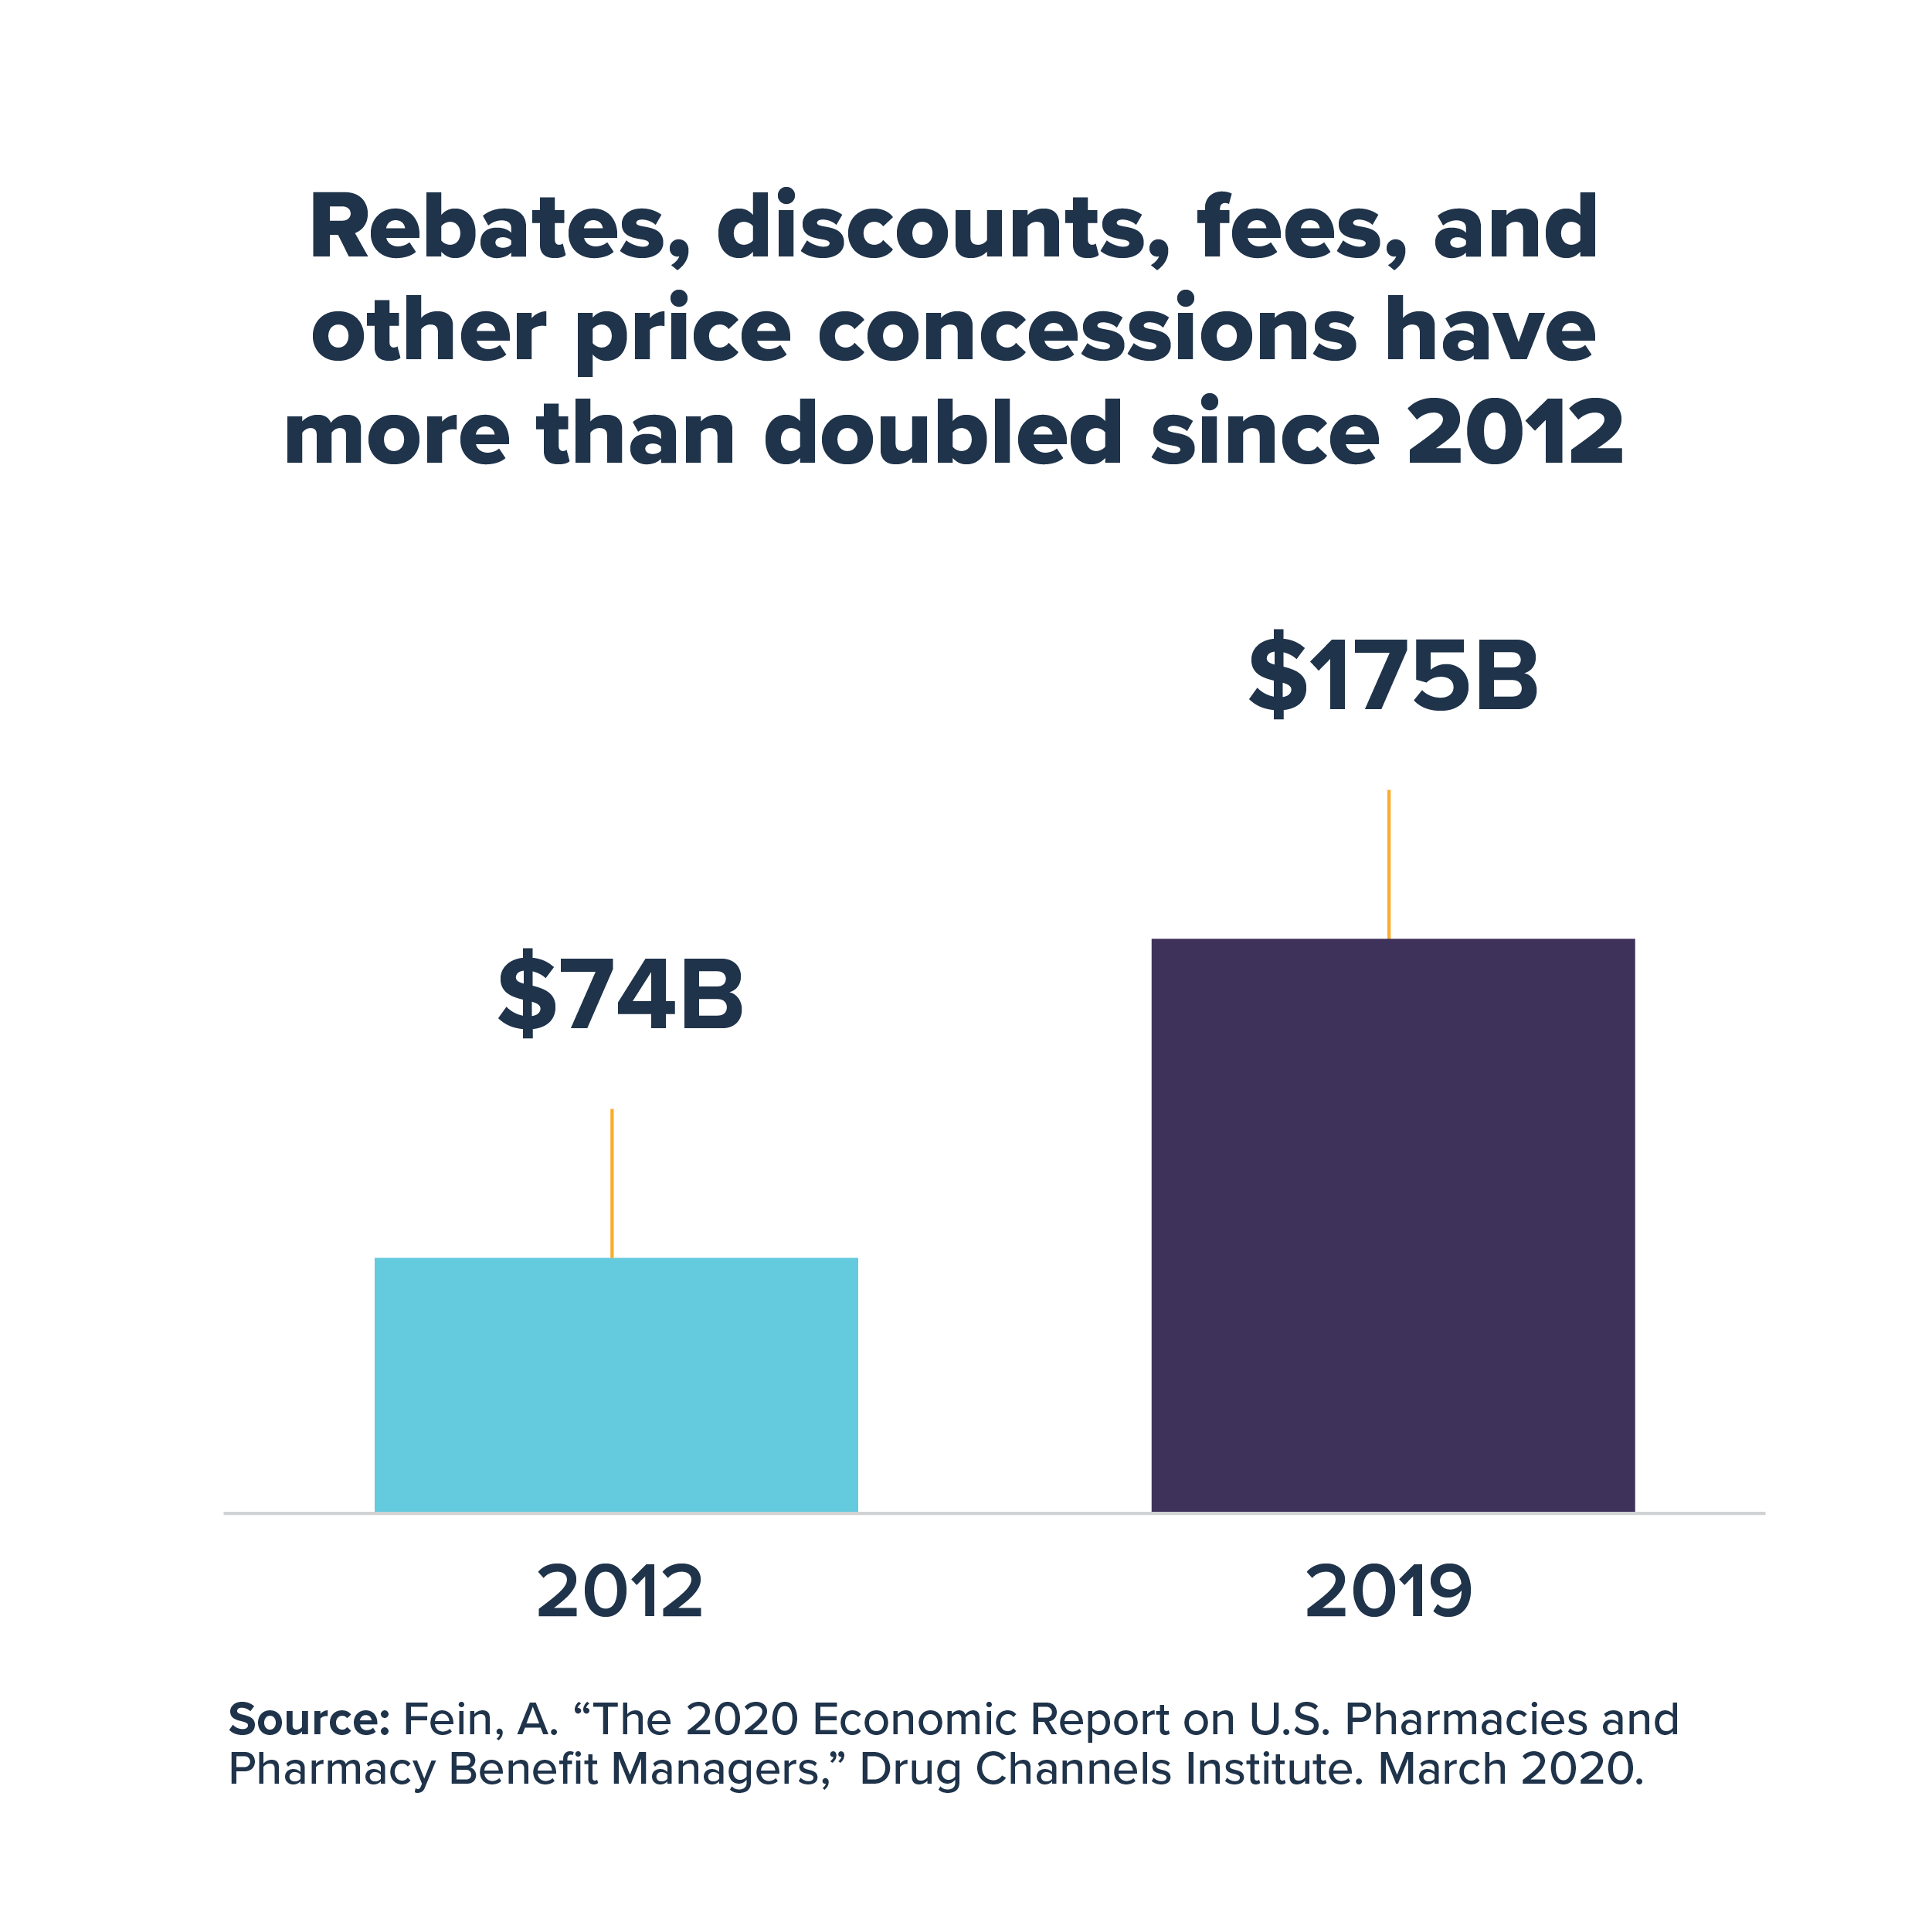 Rebates, discounts, fees and other price concessions have doubled since 2012